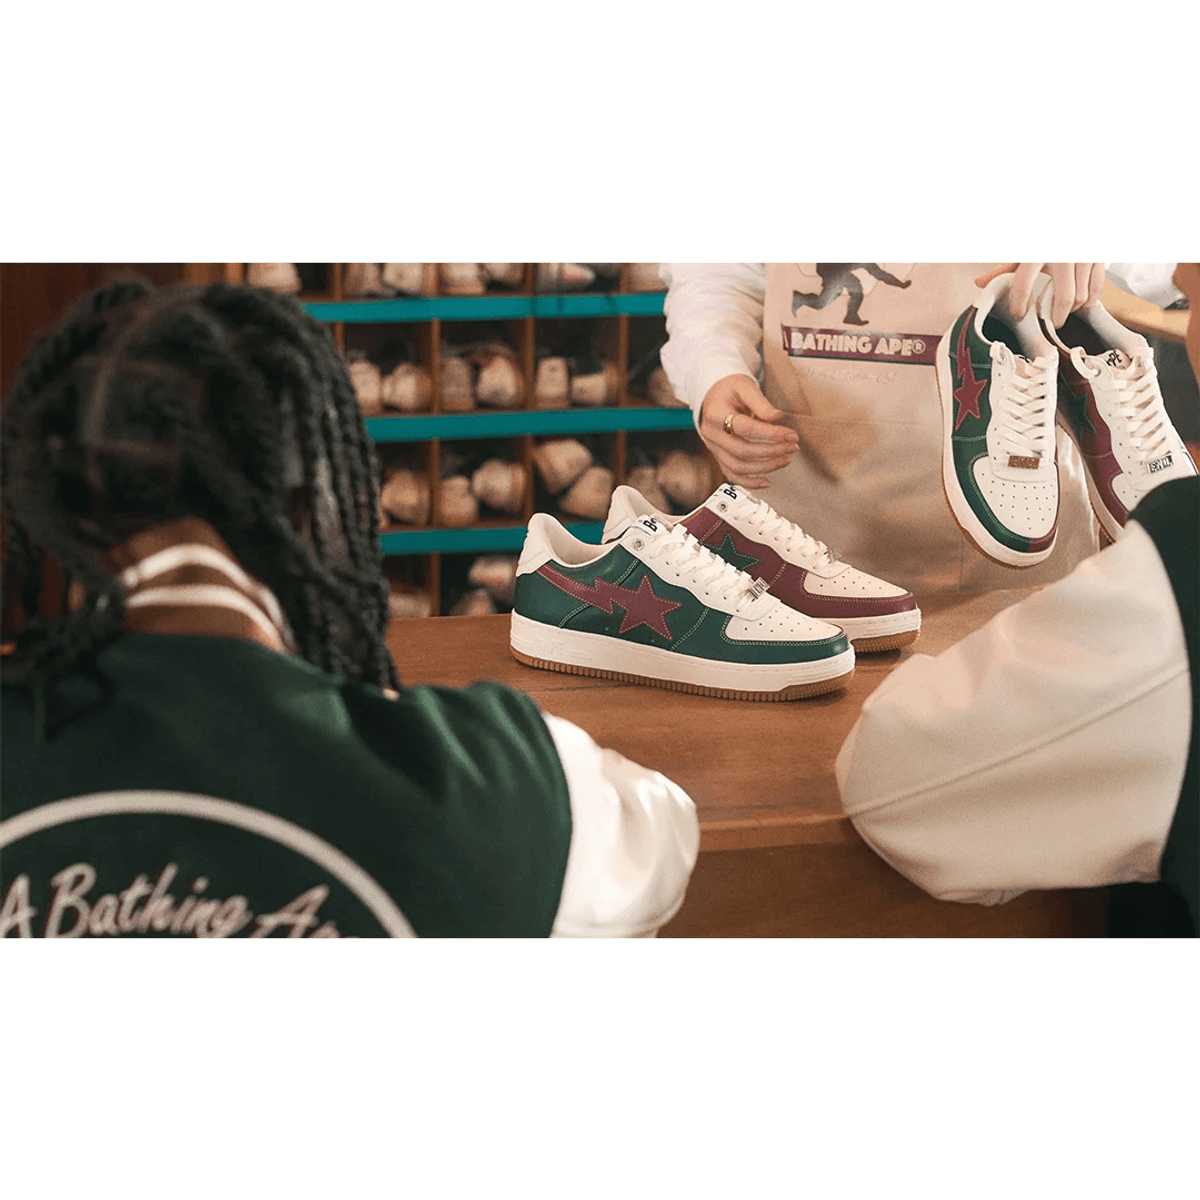 Bape Is Opening Up New Lanes With The Release Of A Bowling Shoe, In Collaboration With END Clothing